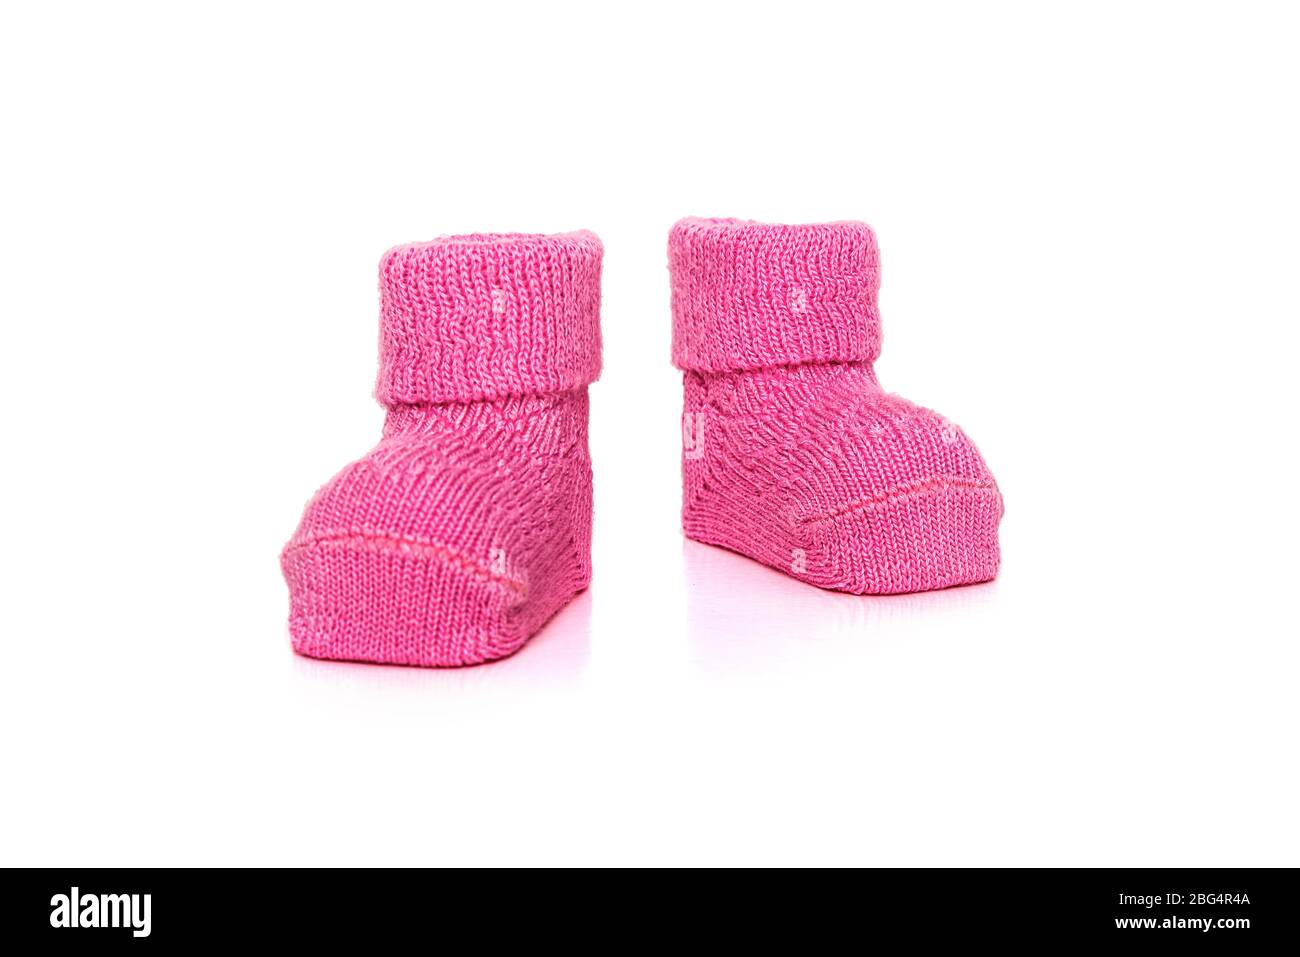 Children's pink shoes isolated Stock Photo